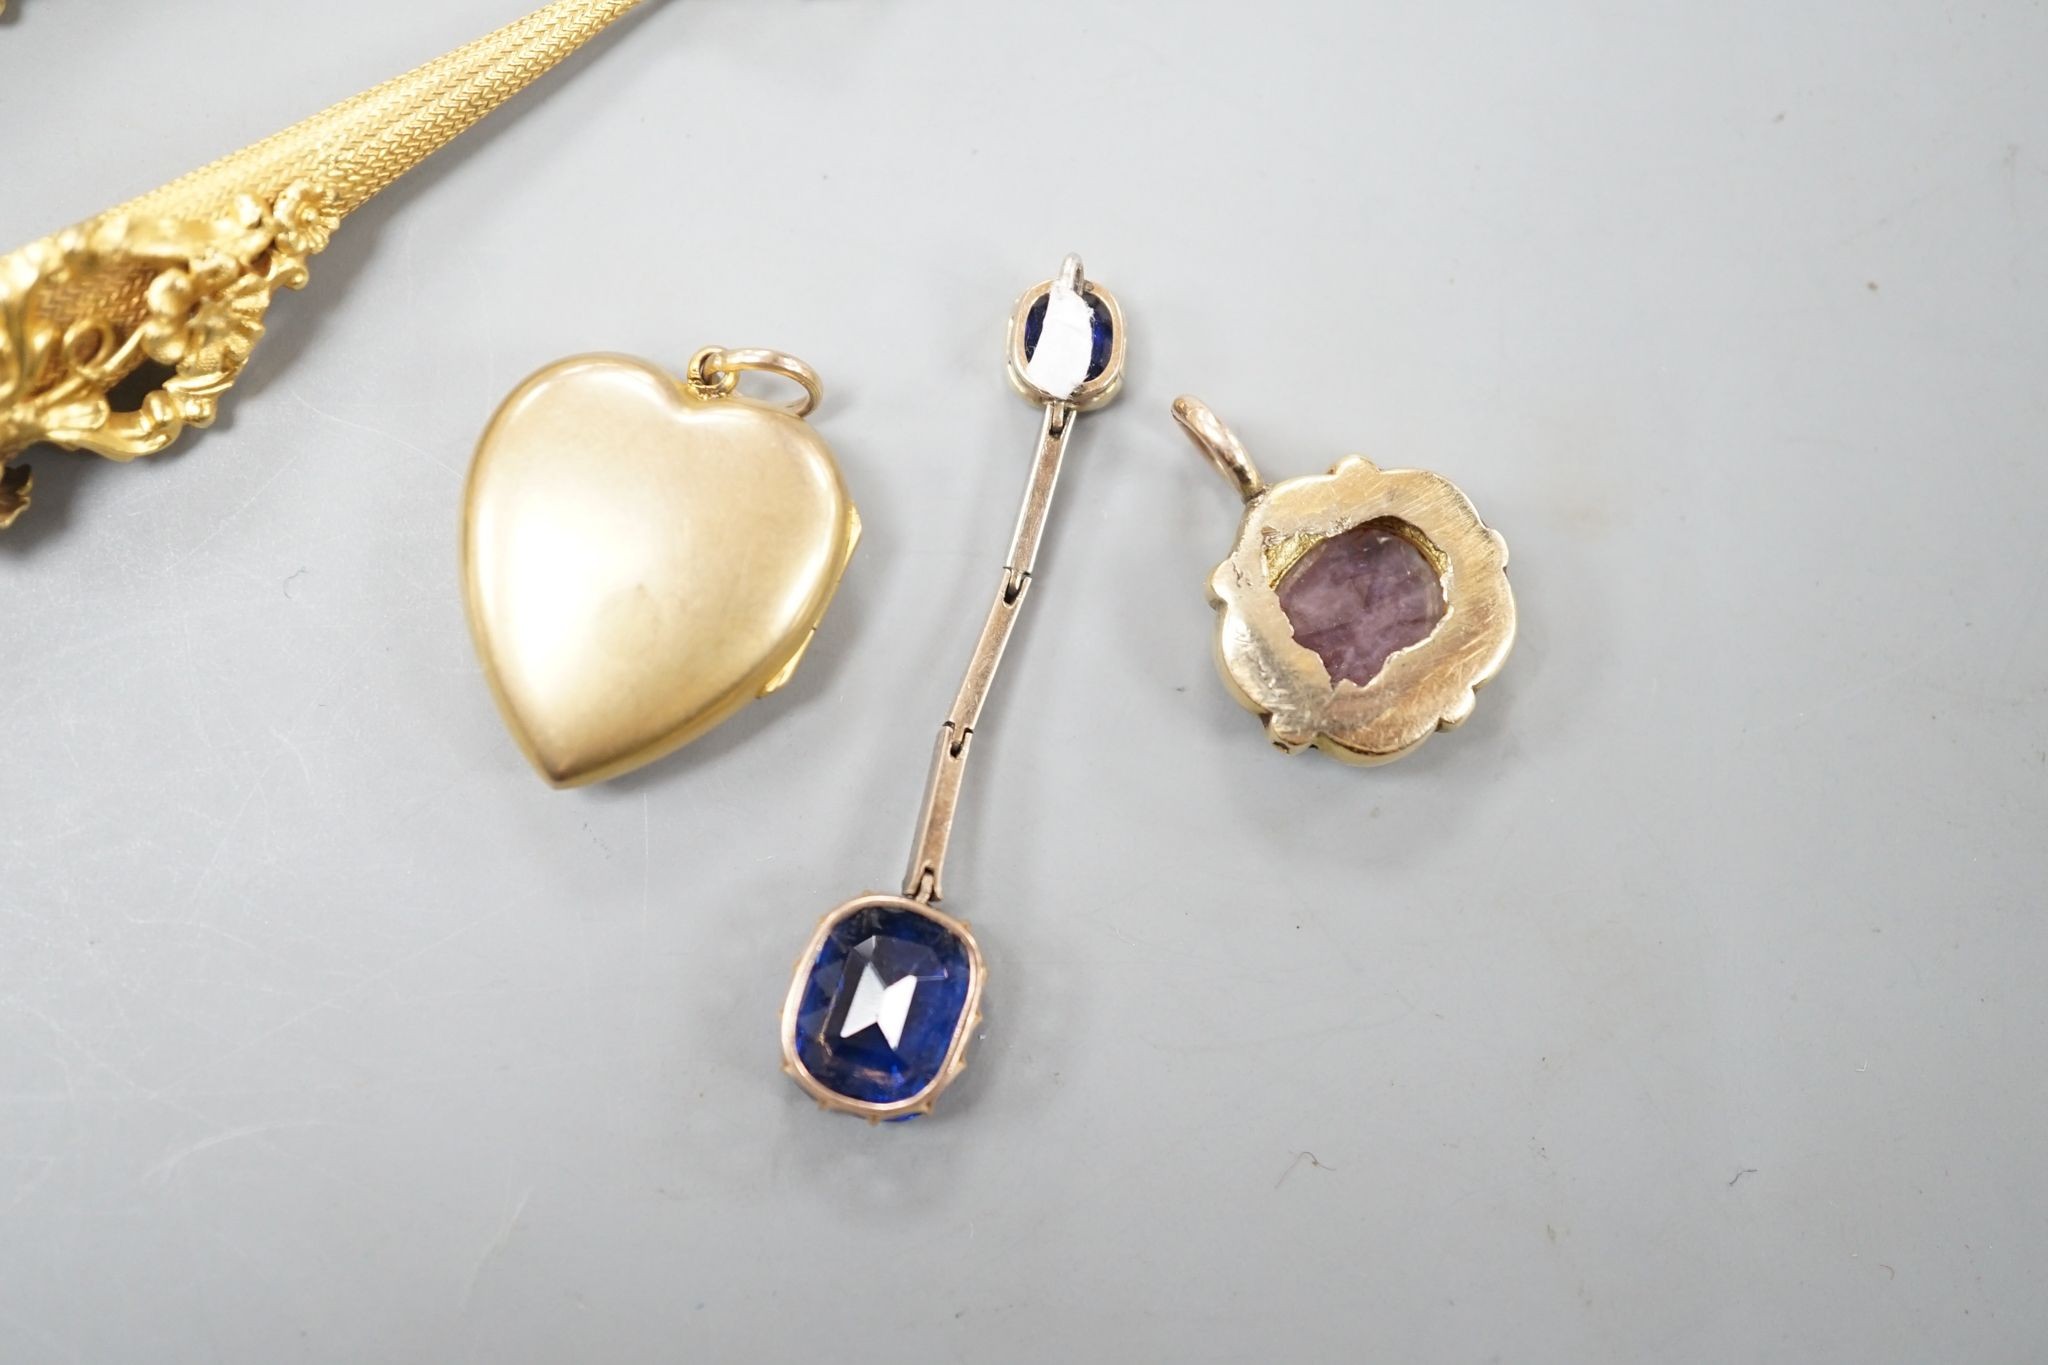 A pair of yellow metal drop earrings, overall 89mm, a simulated sapphire pendant and two other pendants.